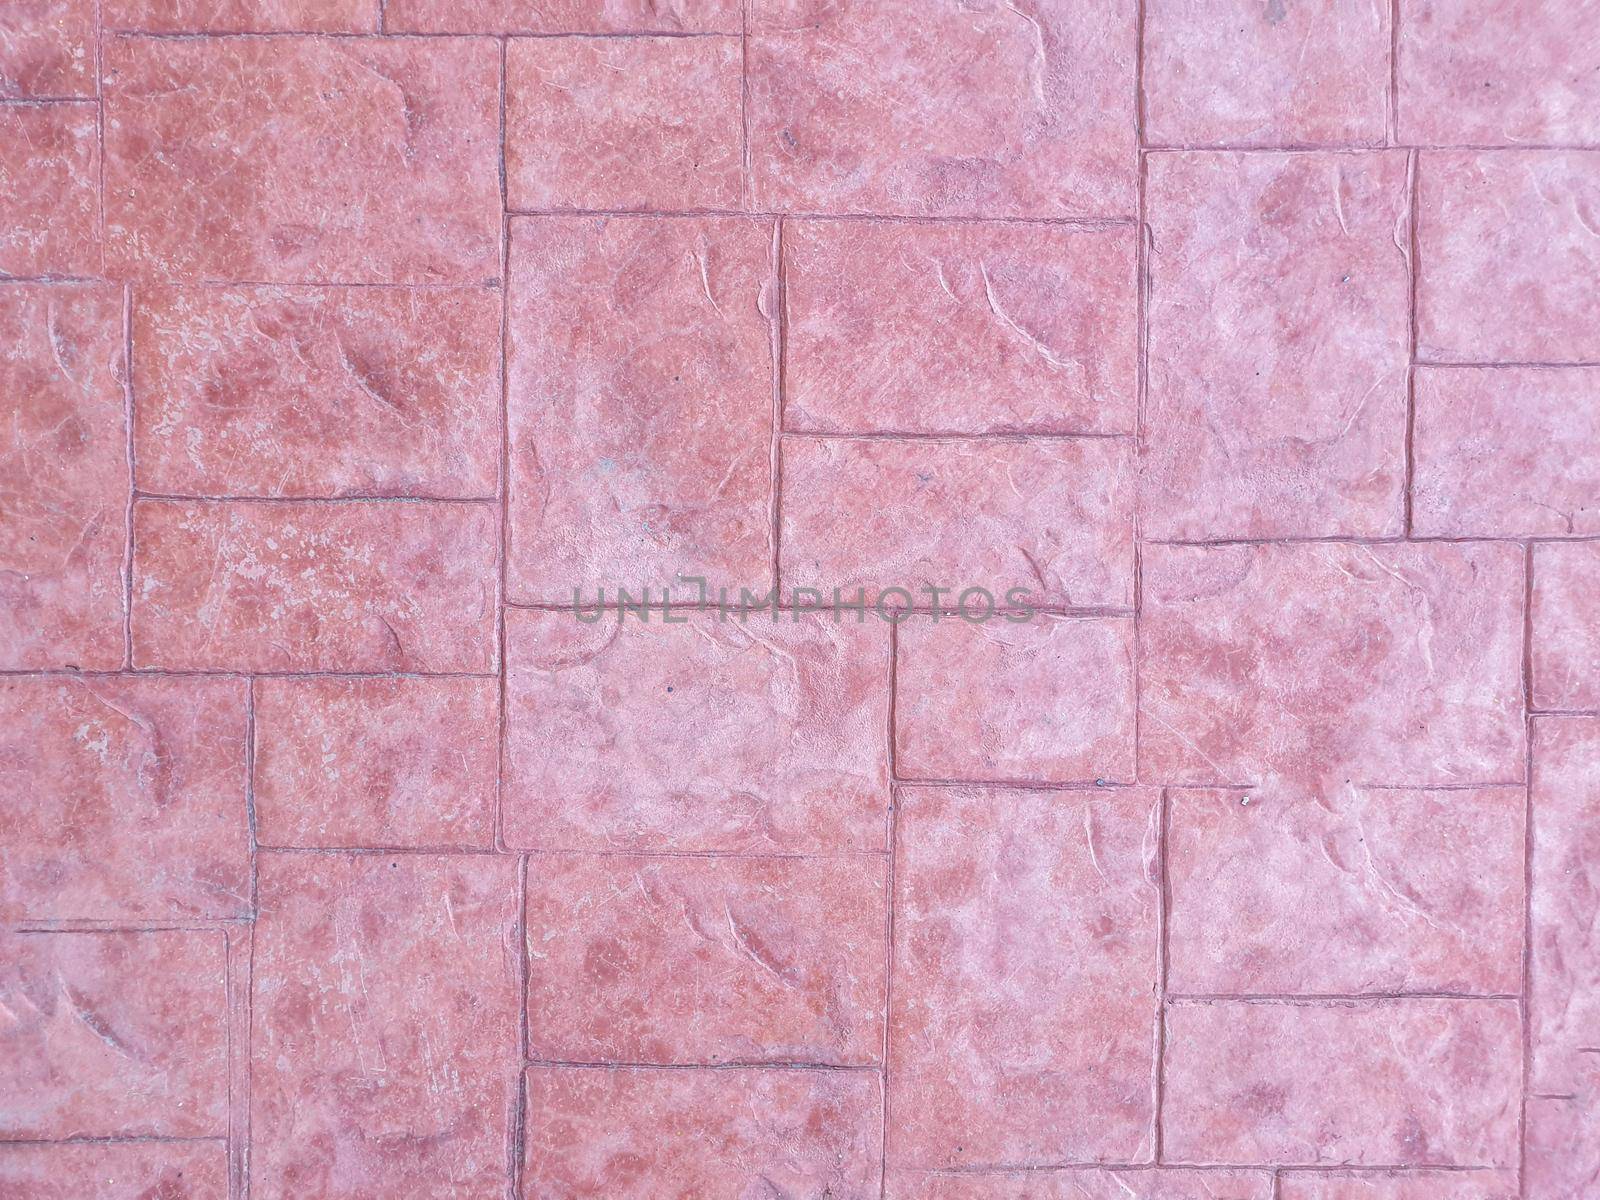 Brick wall or floor texture abstract texture surface background use for background